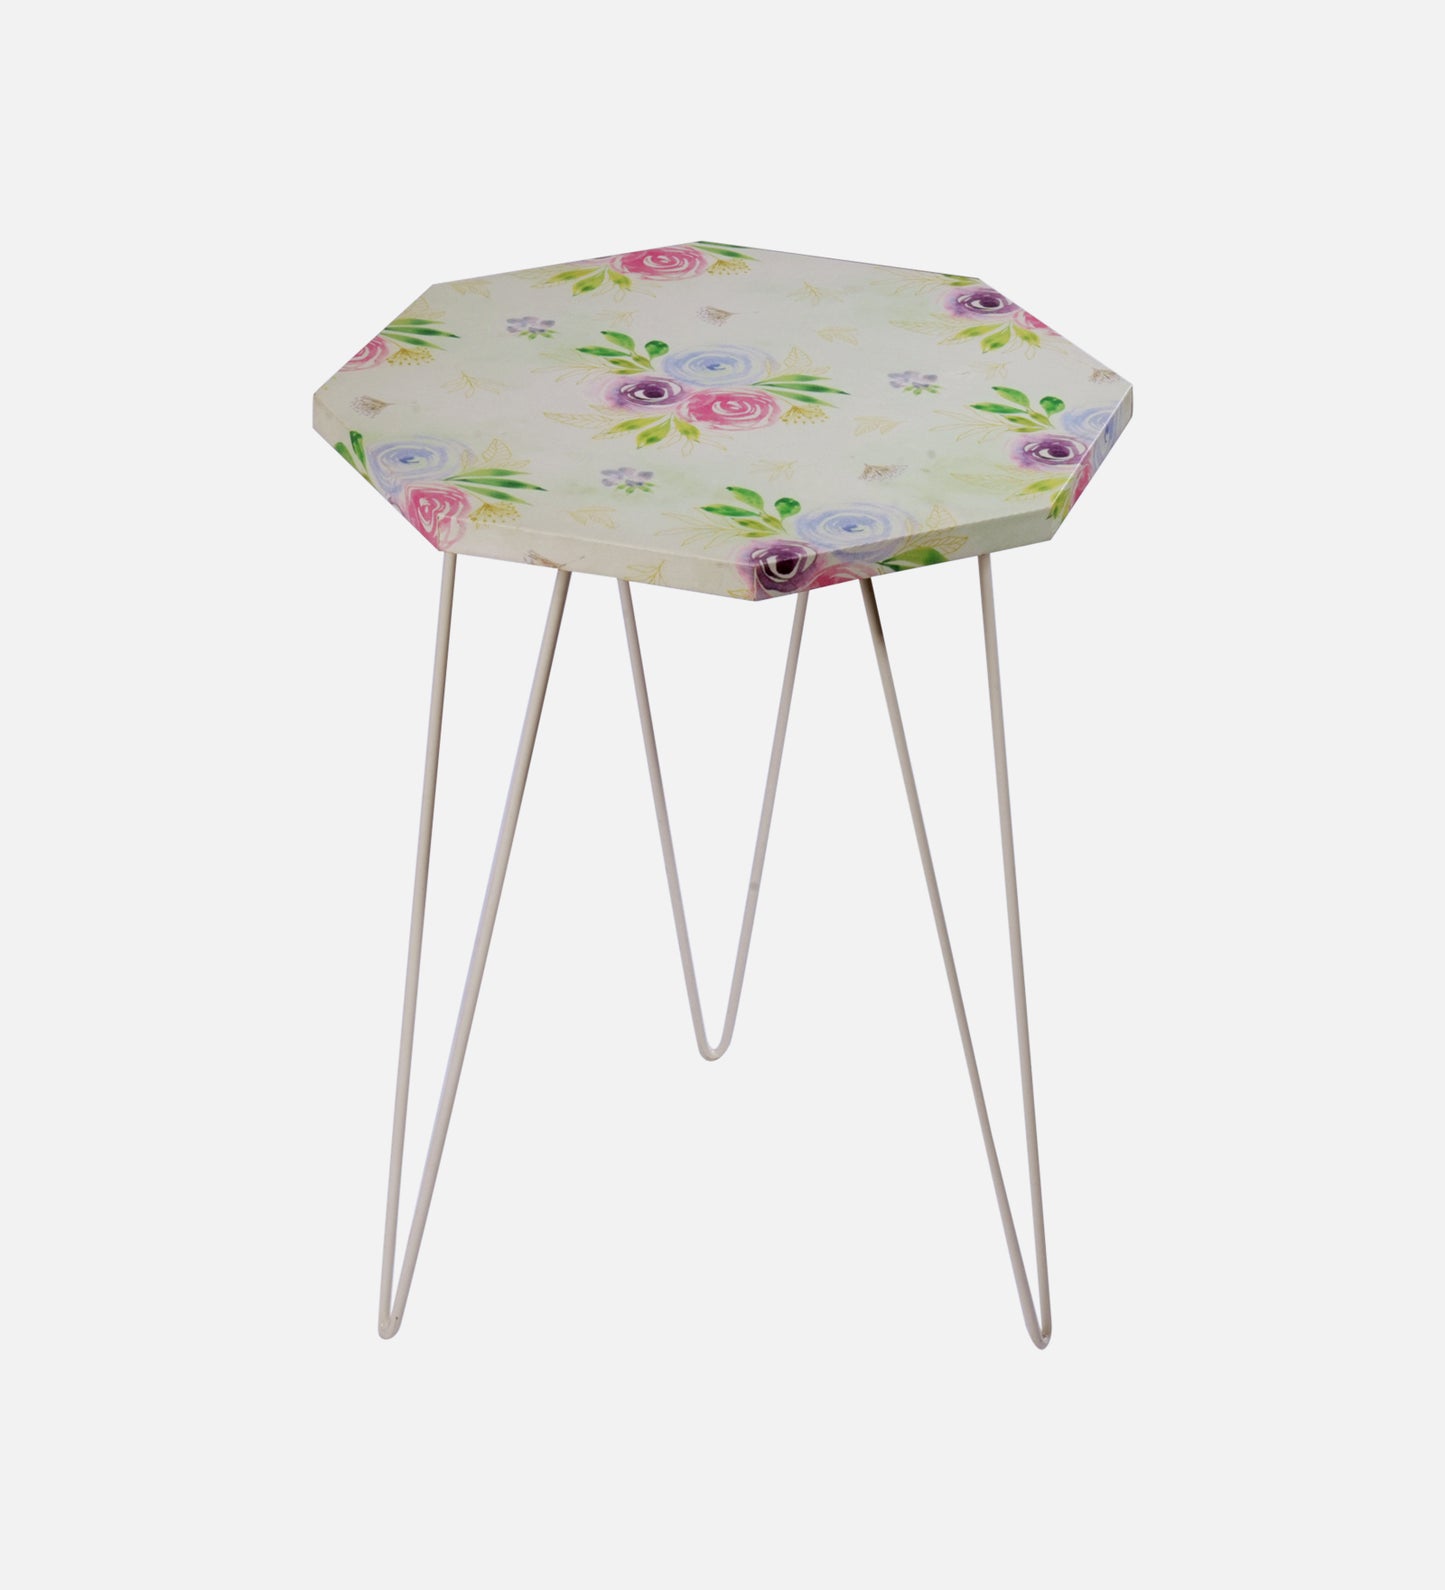 Blush Roses Octagon Side Tables with Hairpin Legs, Side Tables, Wooden Tables, Living Room Decor by A Tiny Mistake